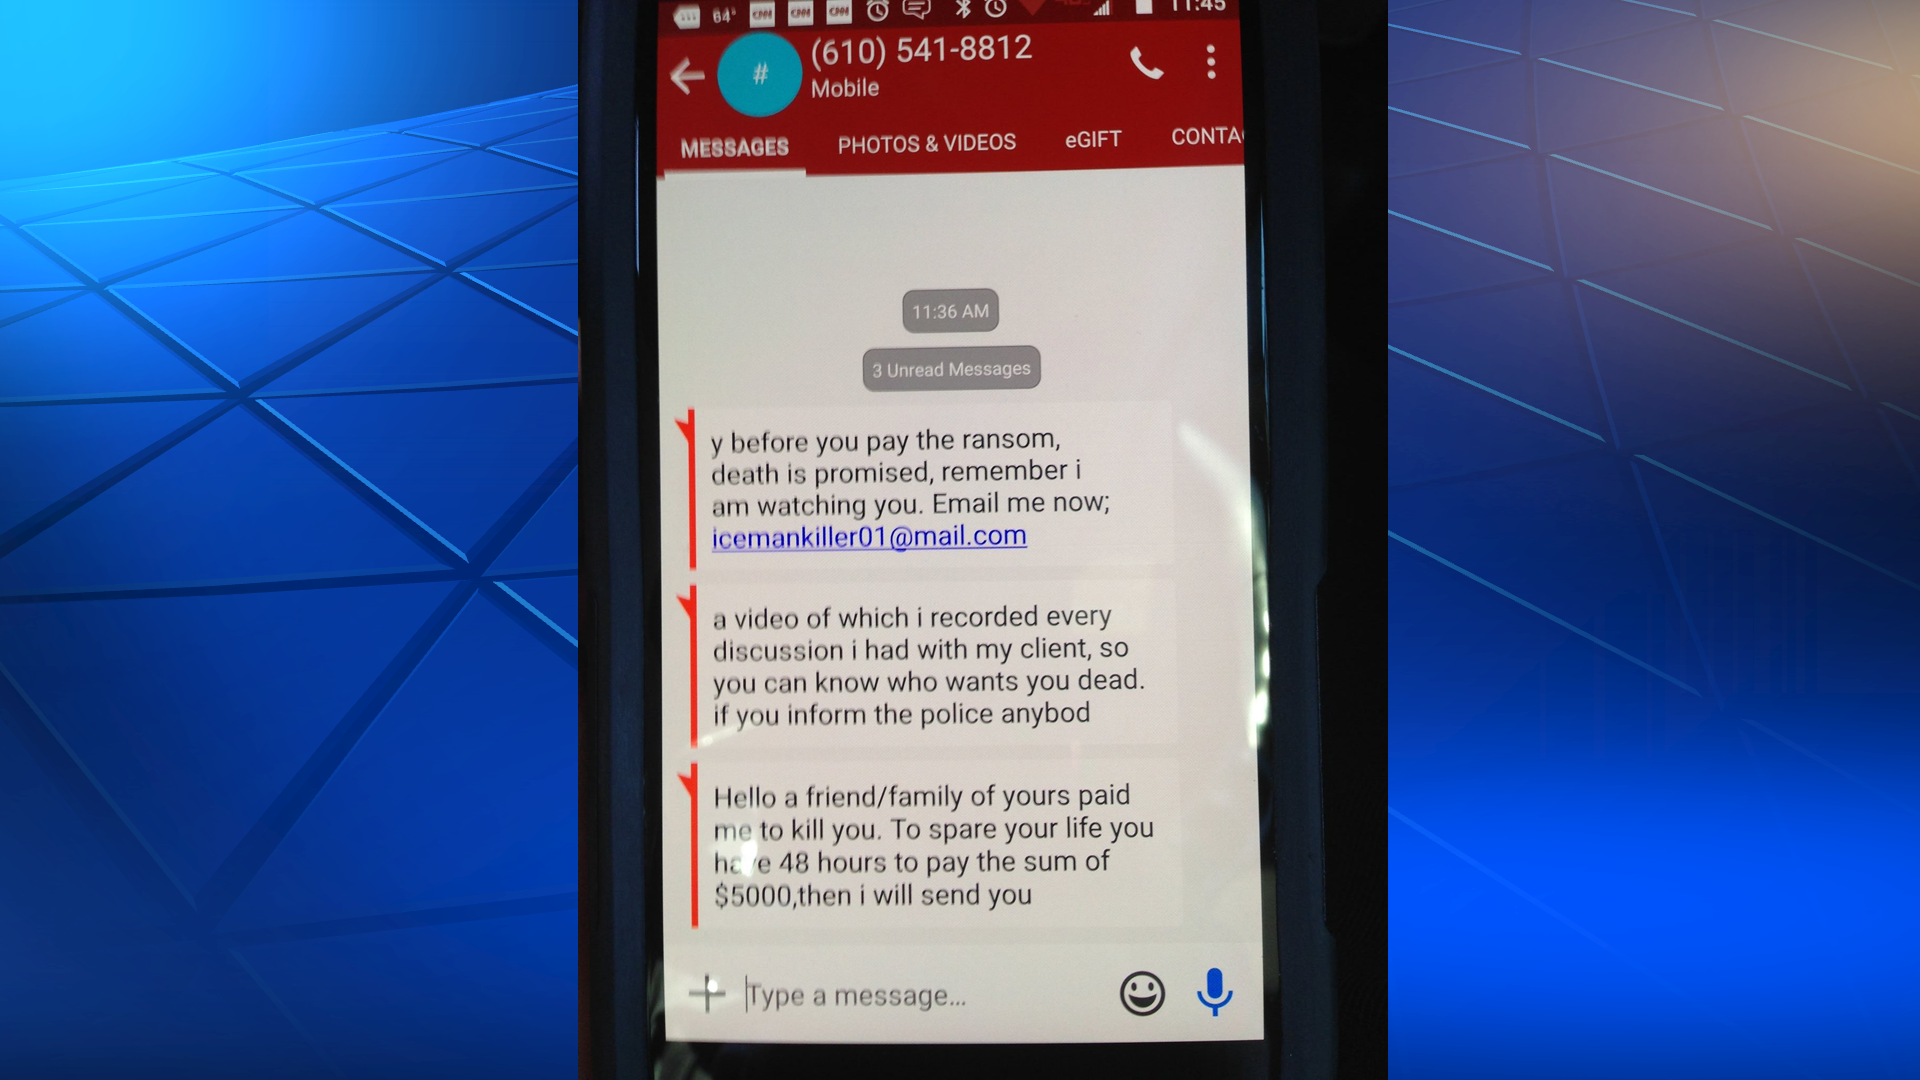 Whitehall police warn of 'Hitman' text message scam